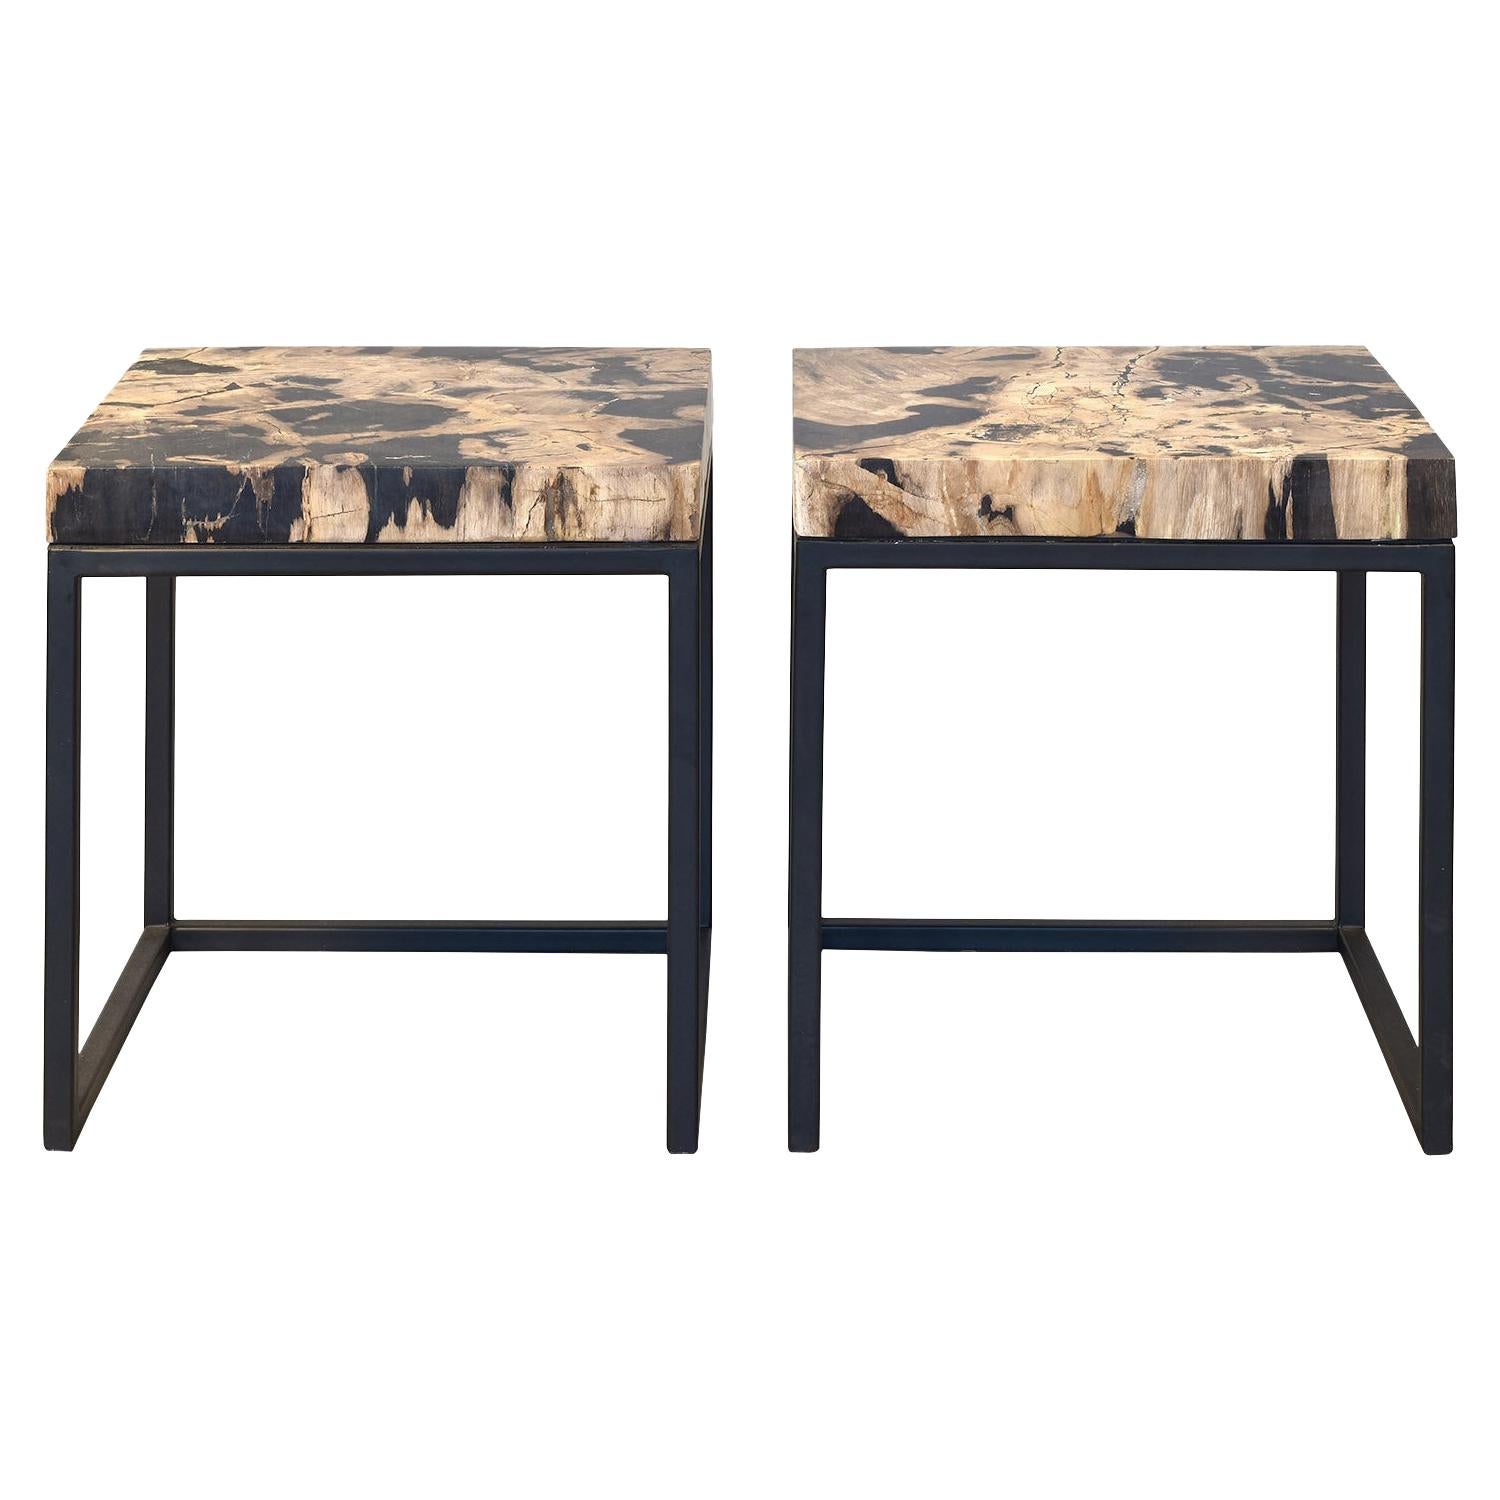 Set of Two End Tables with Petrified Wood Tabletops from Indonesia